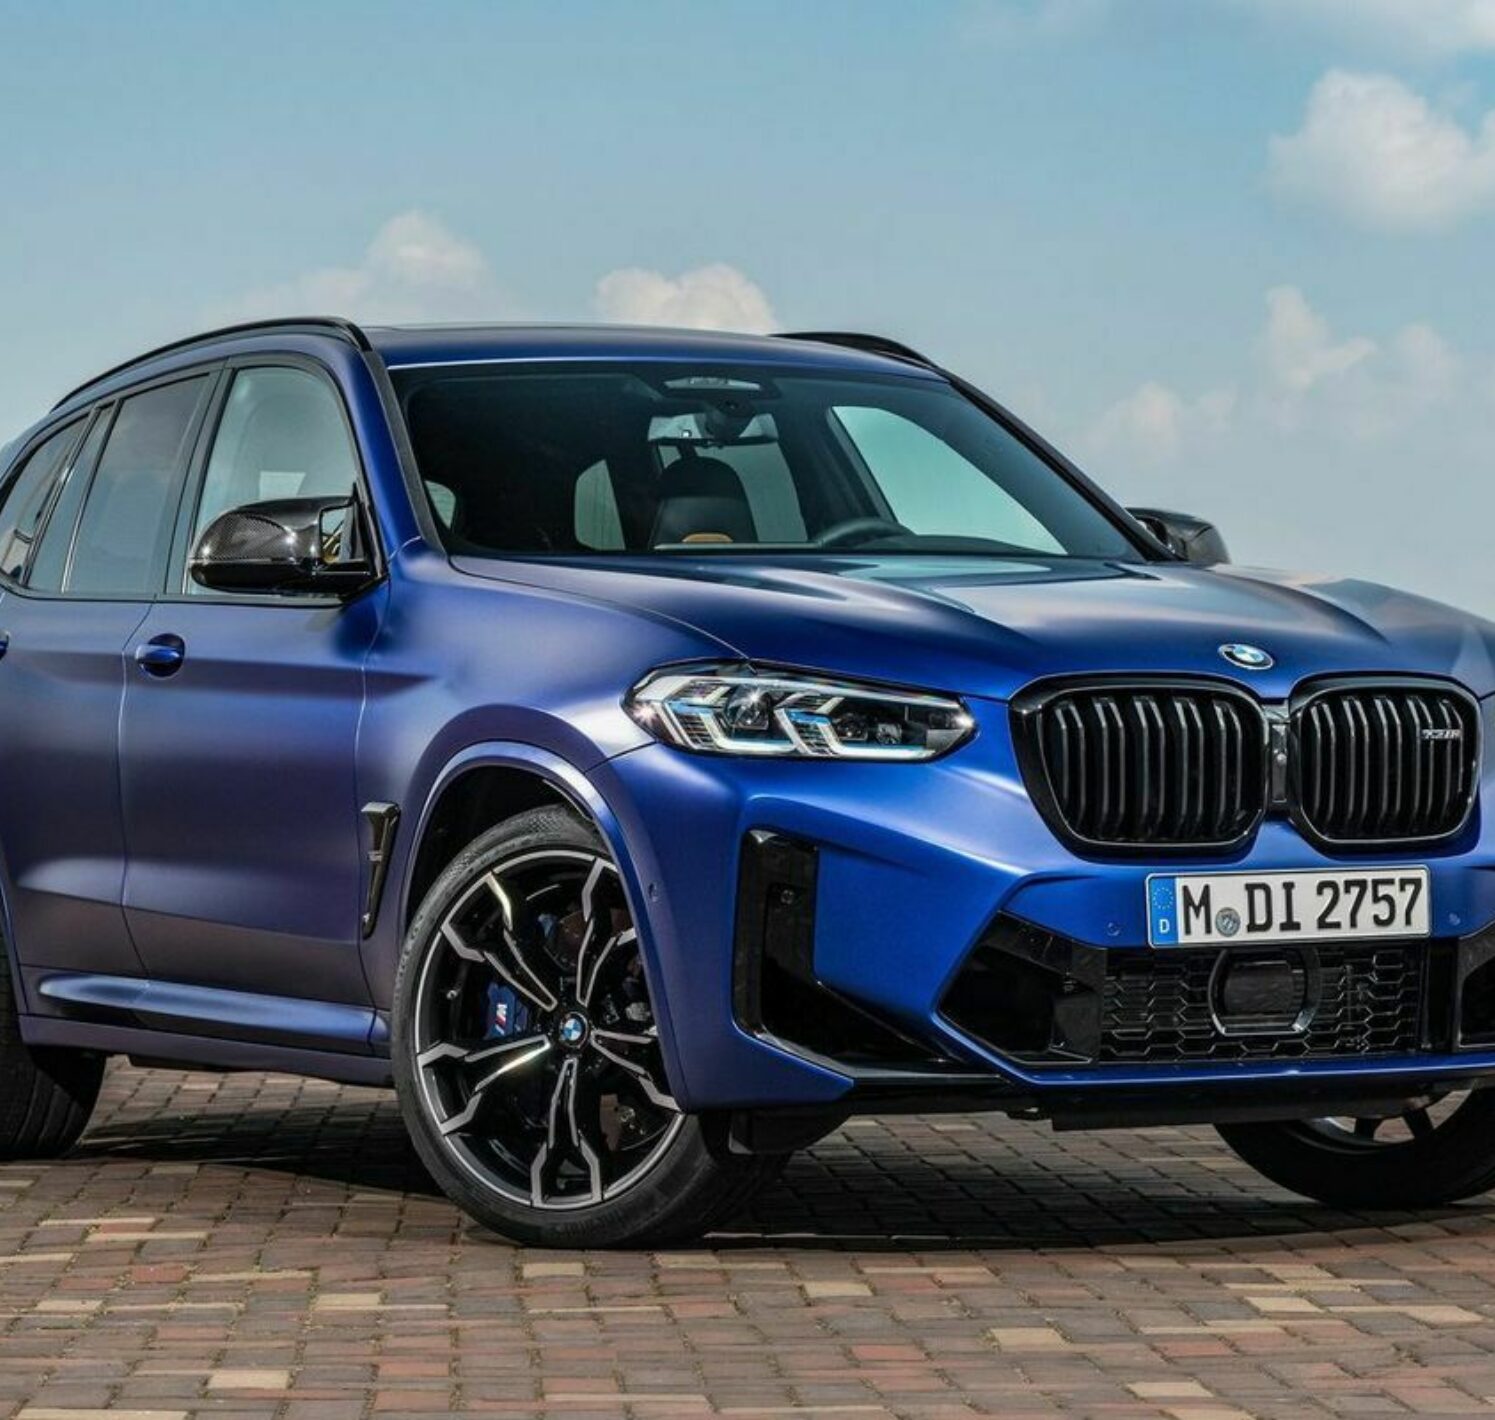 https://autofilter.sk/assets/images/x3/gallery/bmw-x3-m-competition-2022_12-galeria.jpg - obrazok